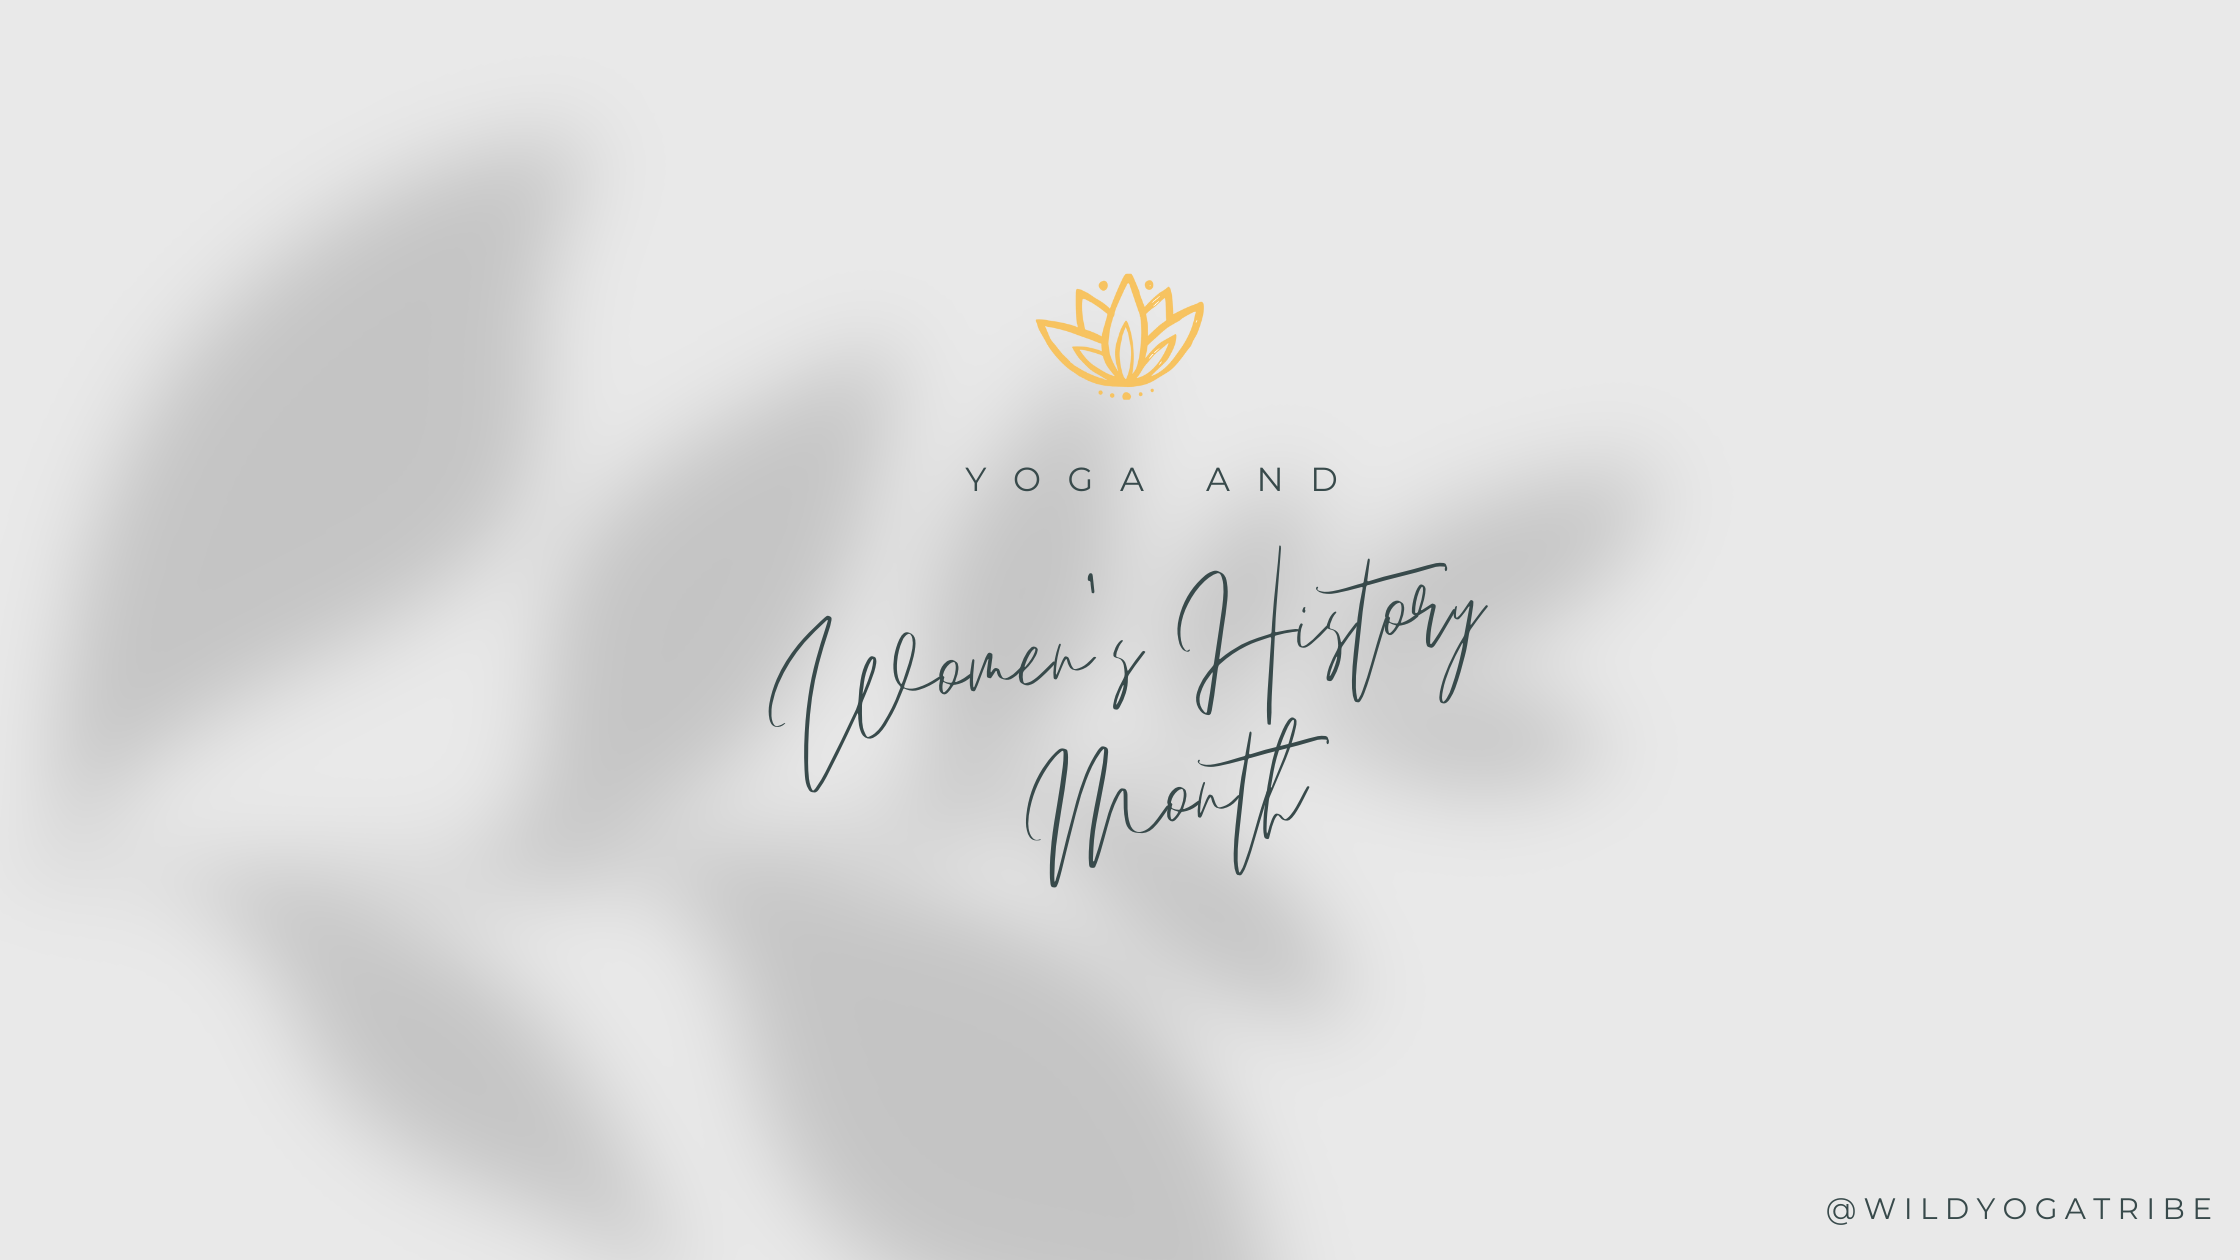 Women have fought to have their presence respected in yoga spaces for thousands of years. To celebrate Women’s History Month, we wanted to highlight women in yoga who pioneered the practice in America! We hope their contributions will continue to be recognized throughout the community.